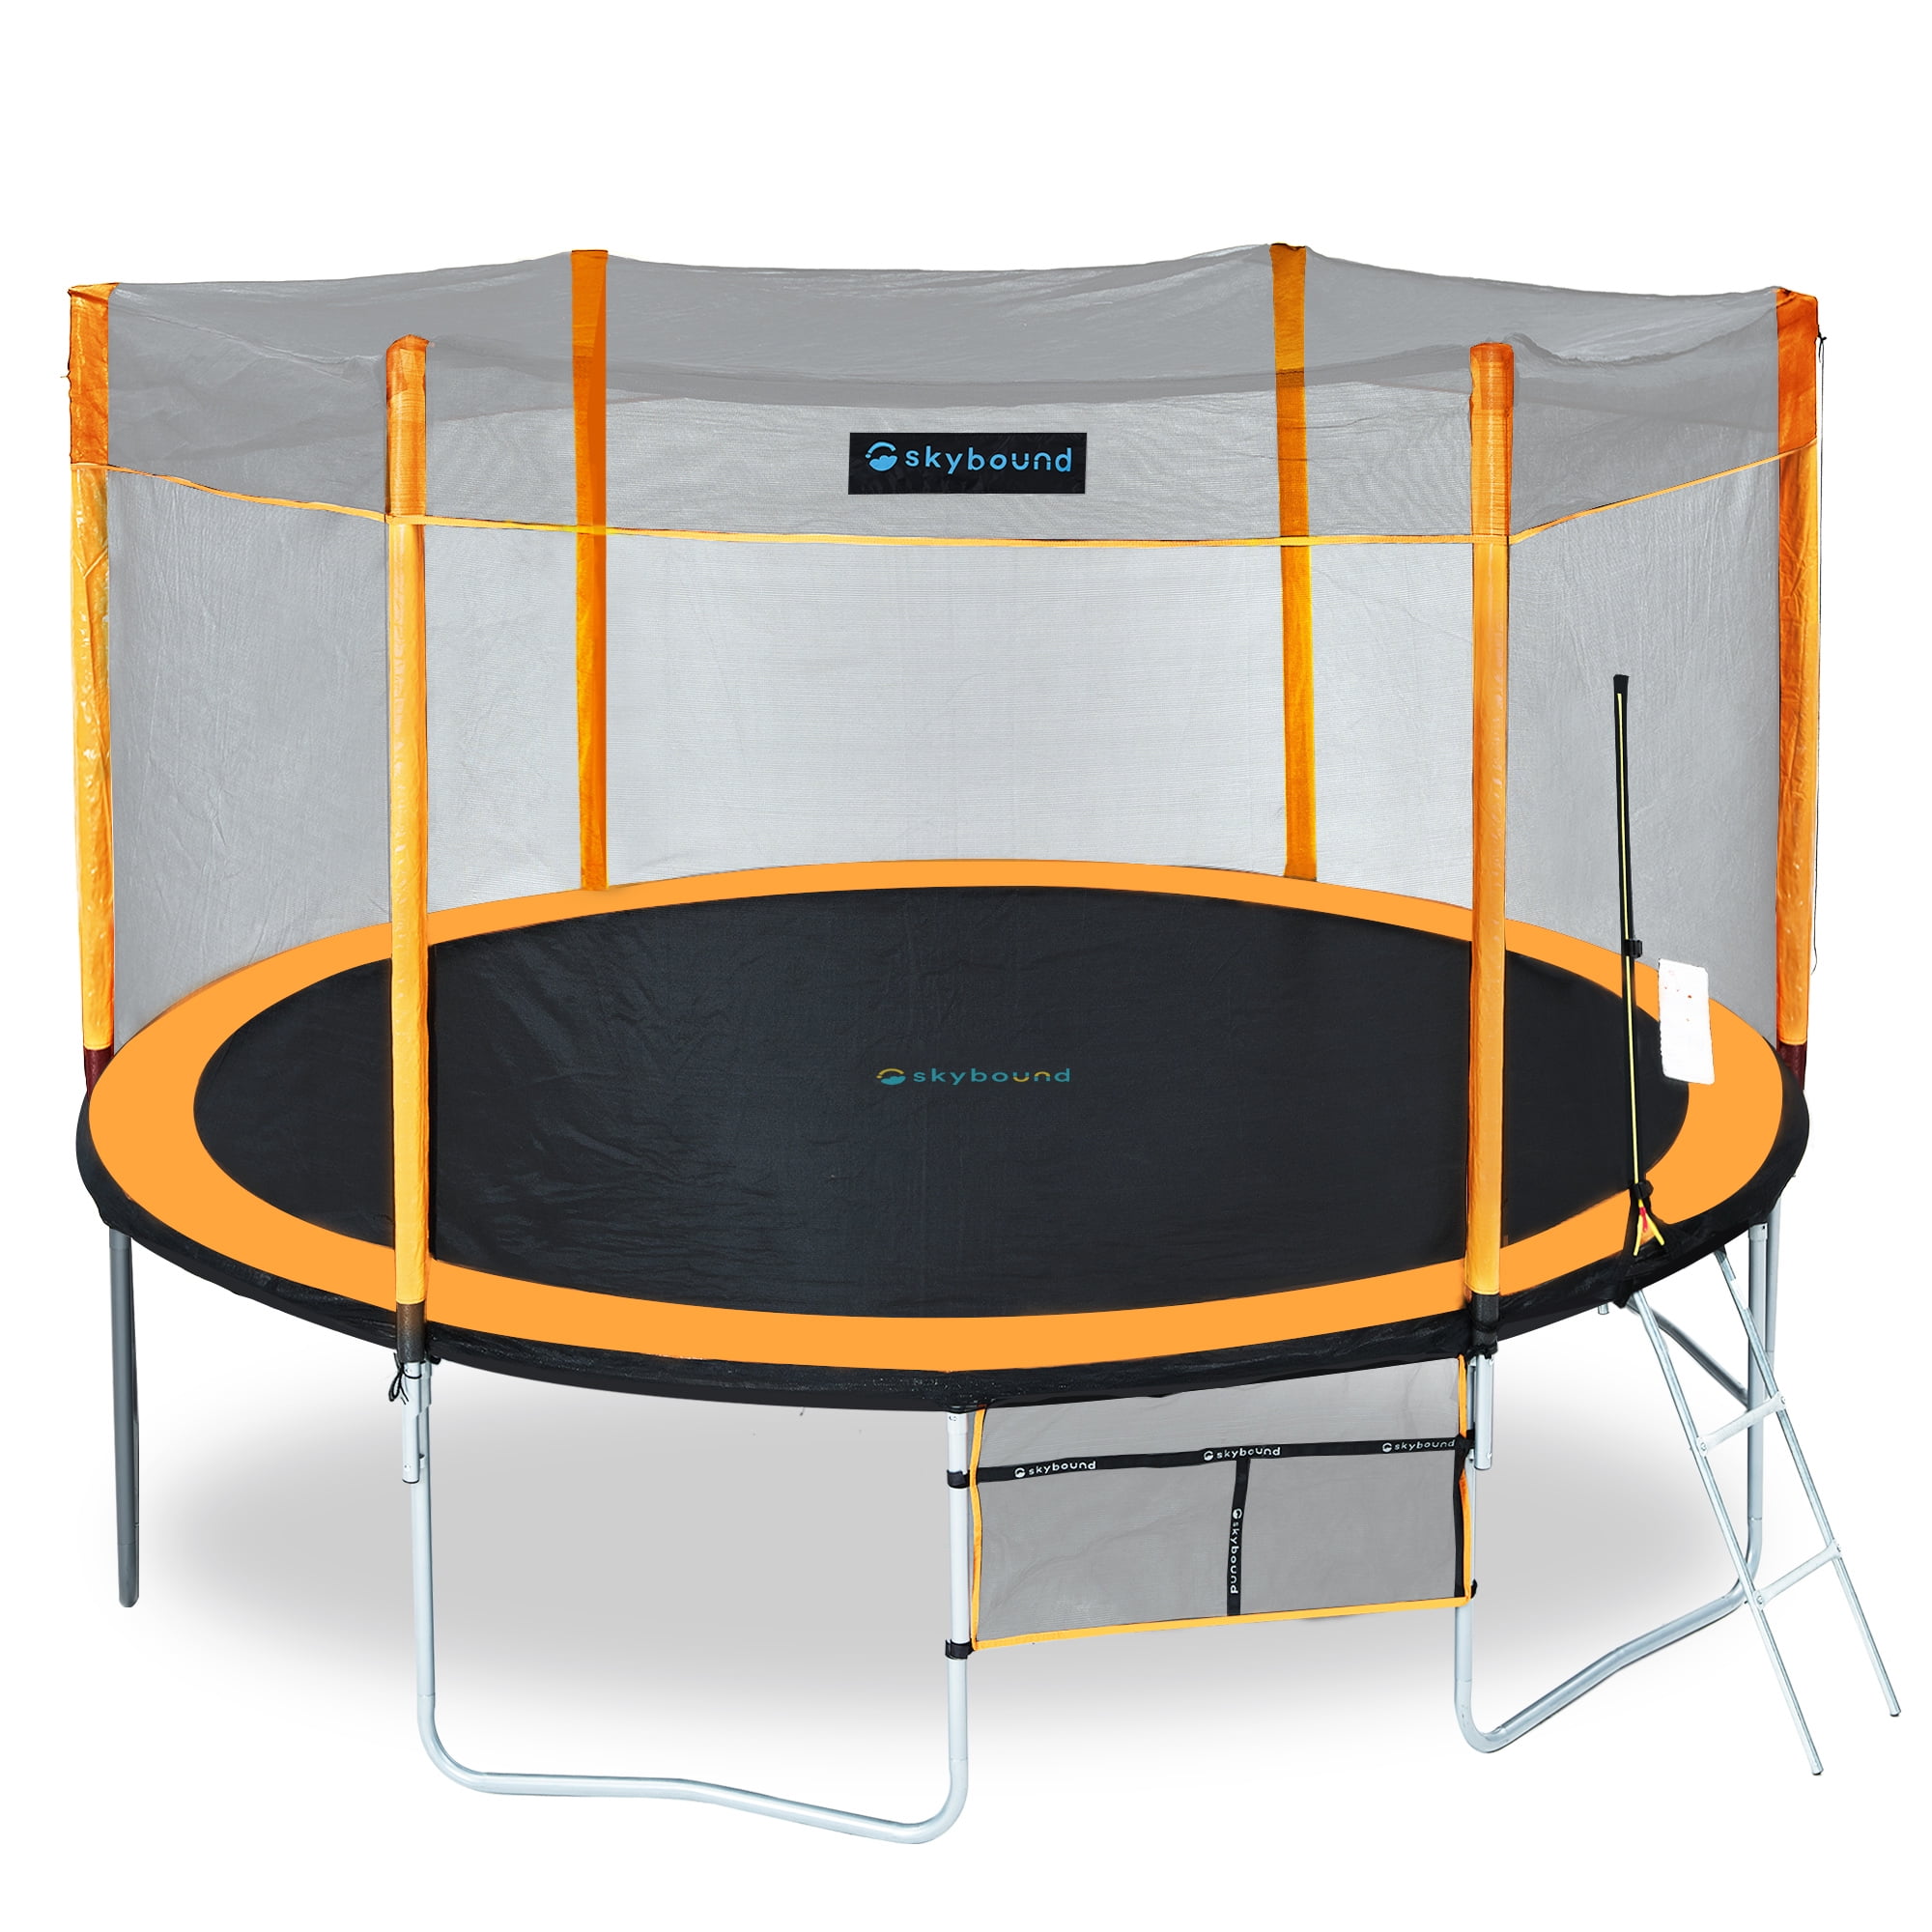 wandelen Masaccio Ham SkyBound 15ft Outdoor Recreational Trampoline with Enclosuure Net for Kids  and Adults,ASTM Aprroved,Orange - Walmart.com